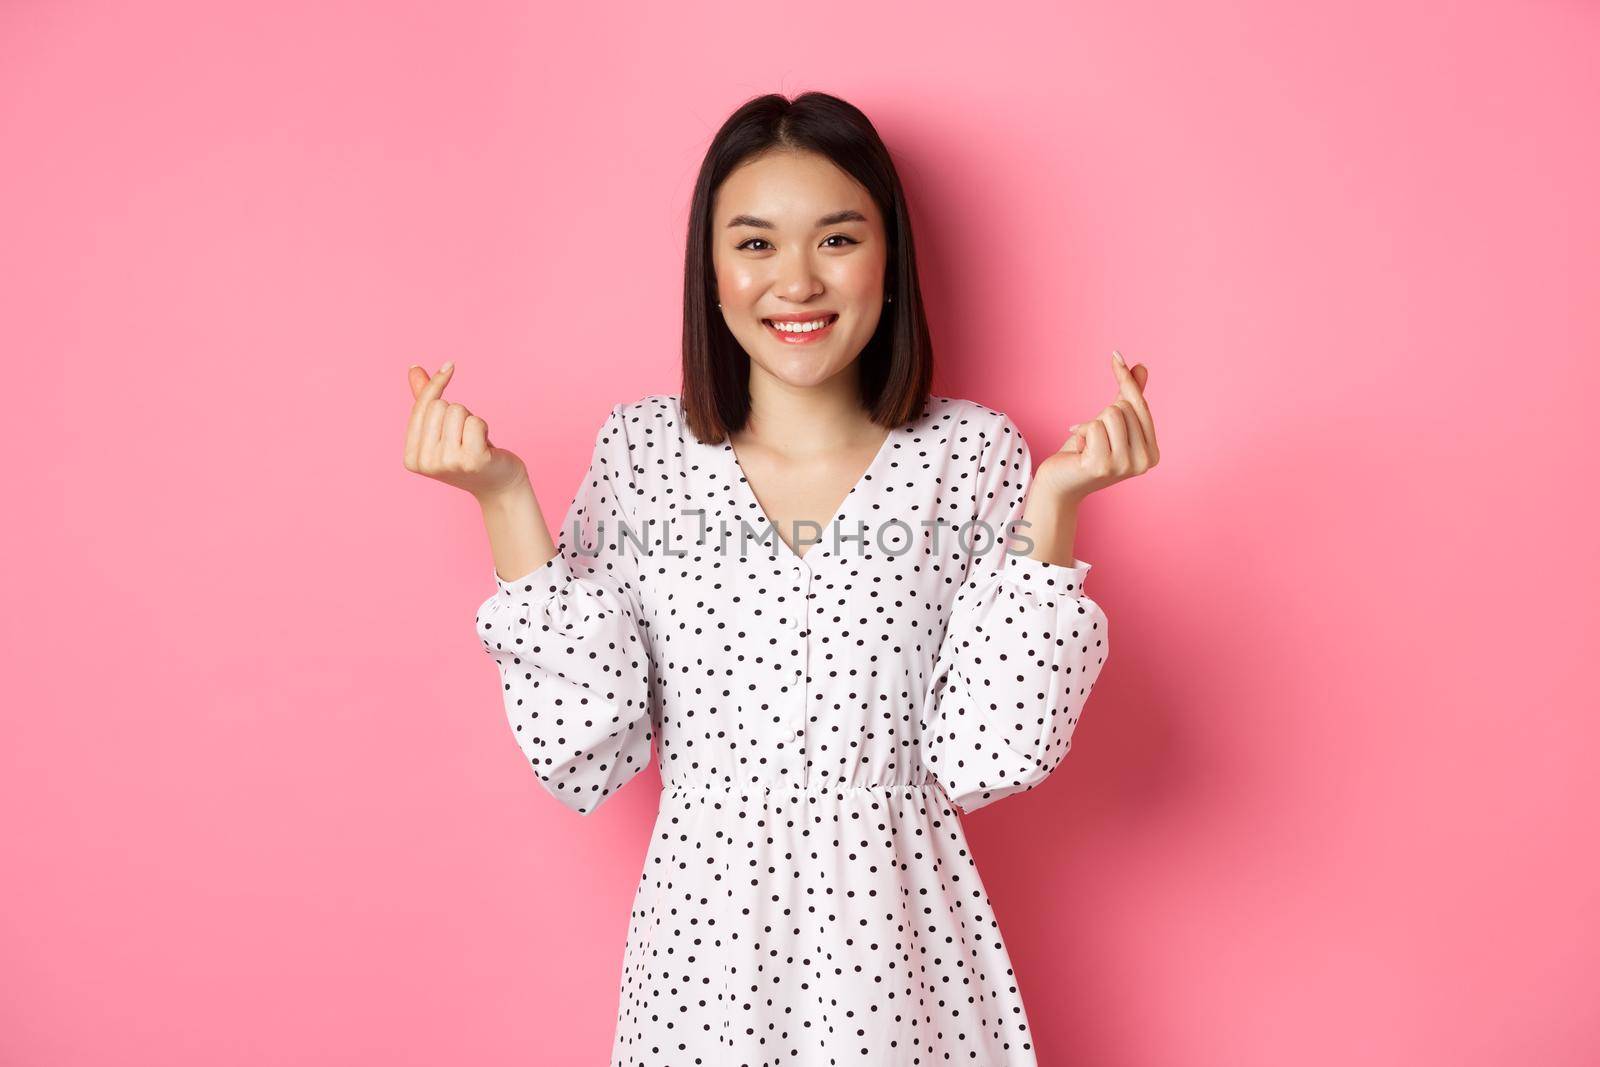 Lovely asian woman in dress showing korean heart signs and smiling, standing on romantic pink background.